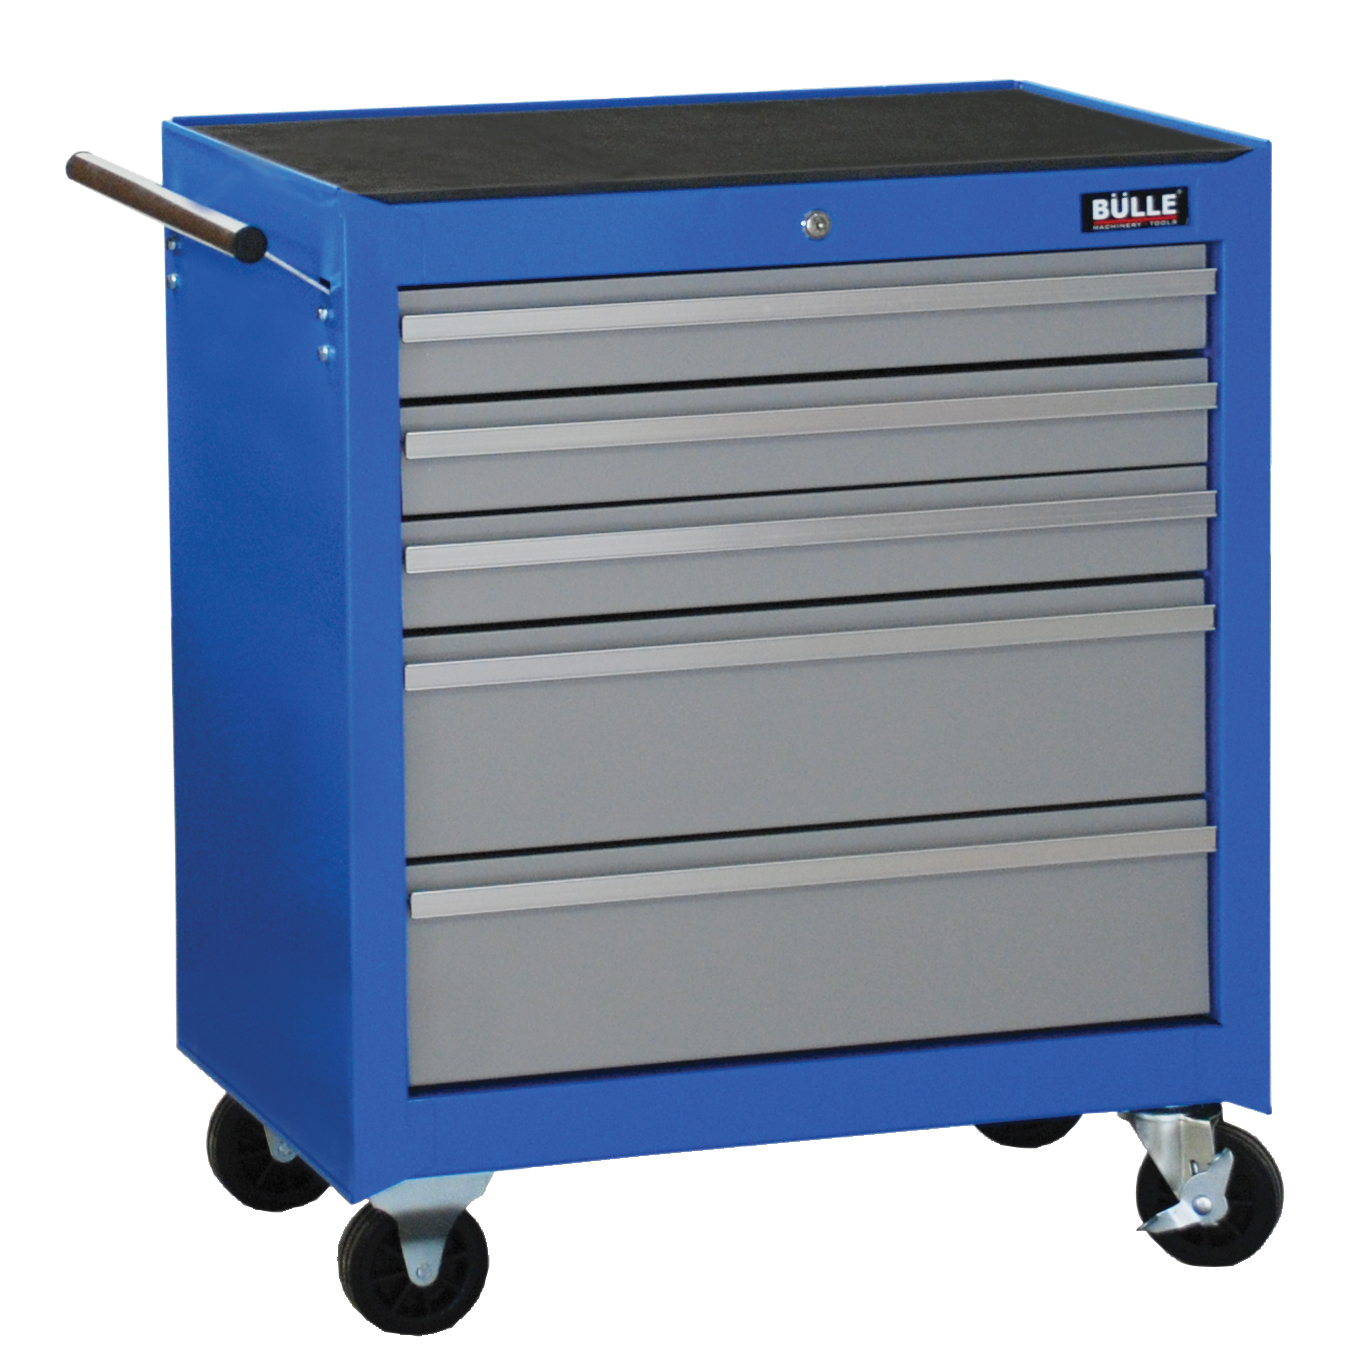 TC805 Mechanics Tool Trolley with 5 Drawers Bulle